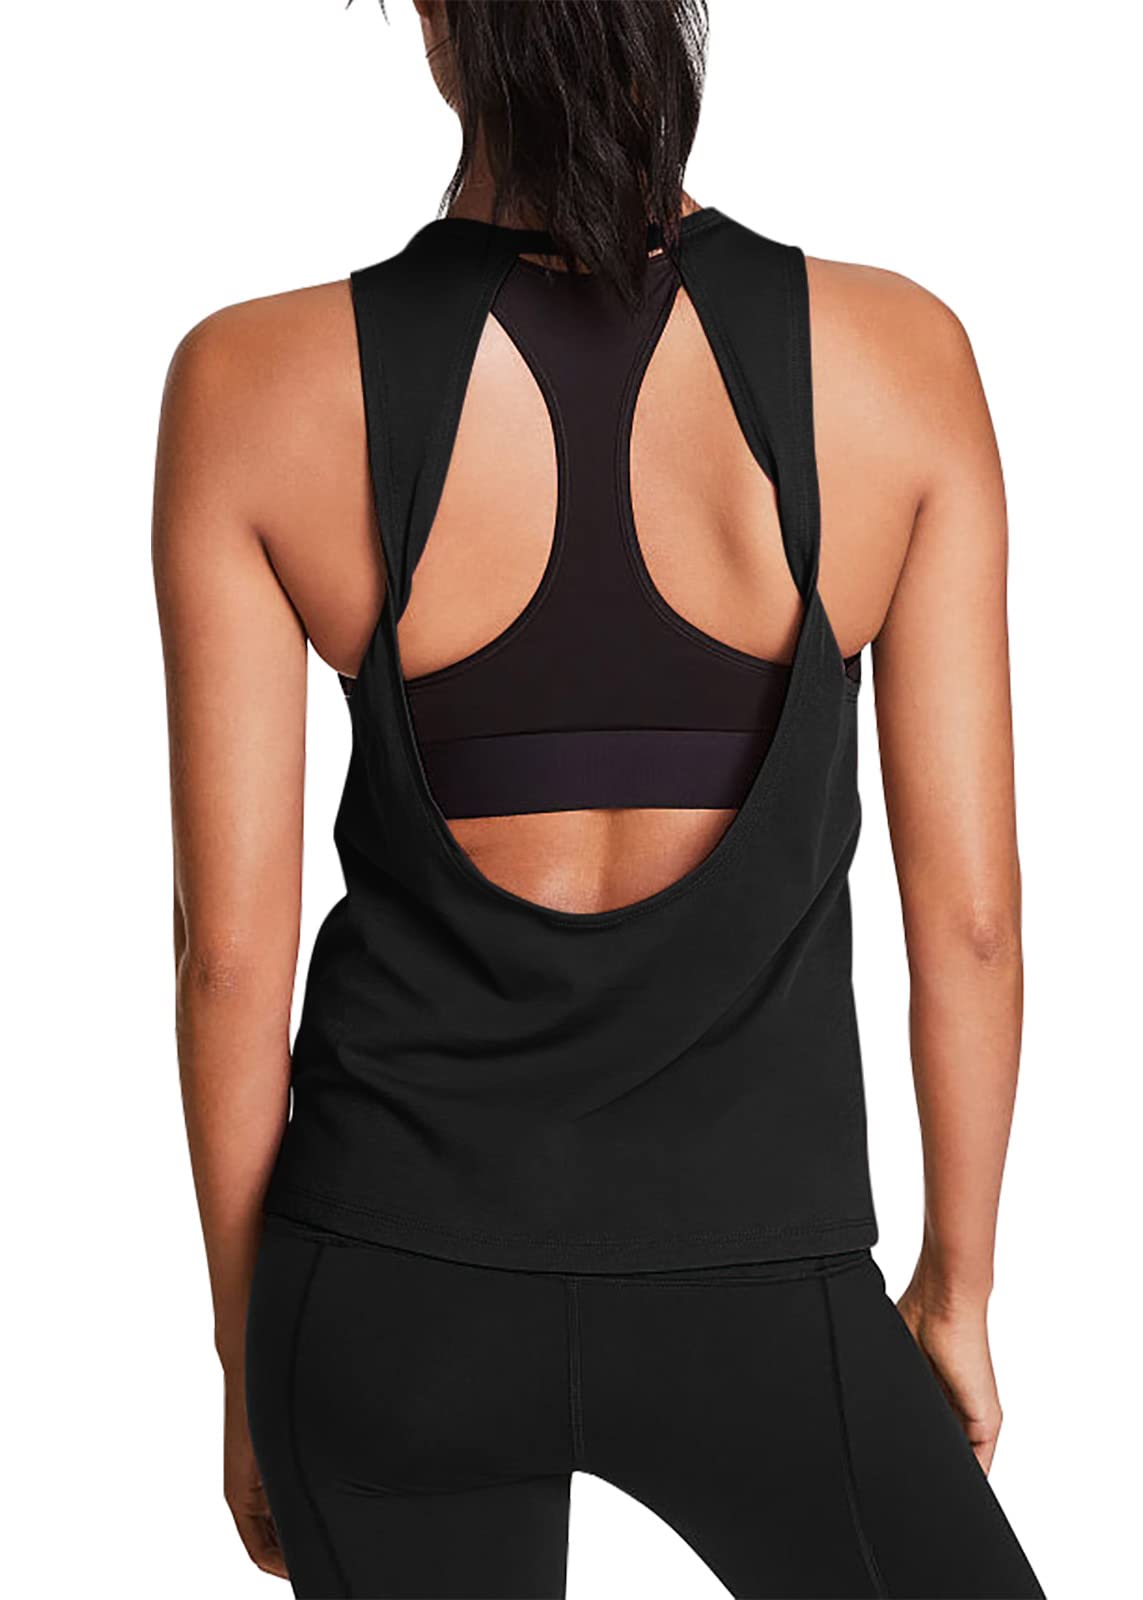 Mippo Workout Tops for Women Open Back Yoga Shirts Tank Tops